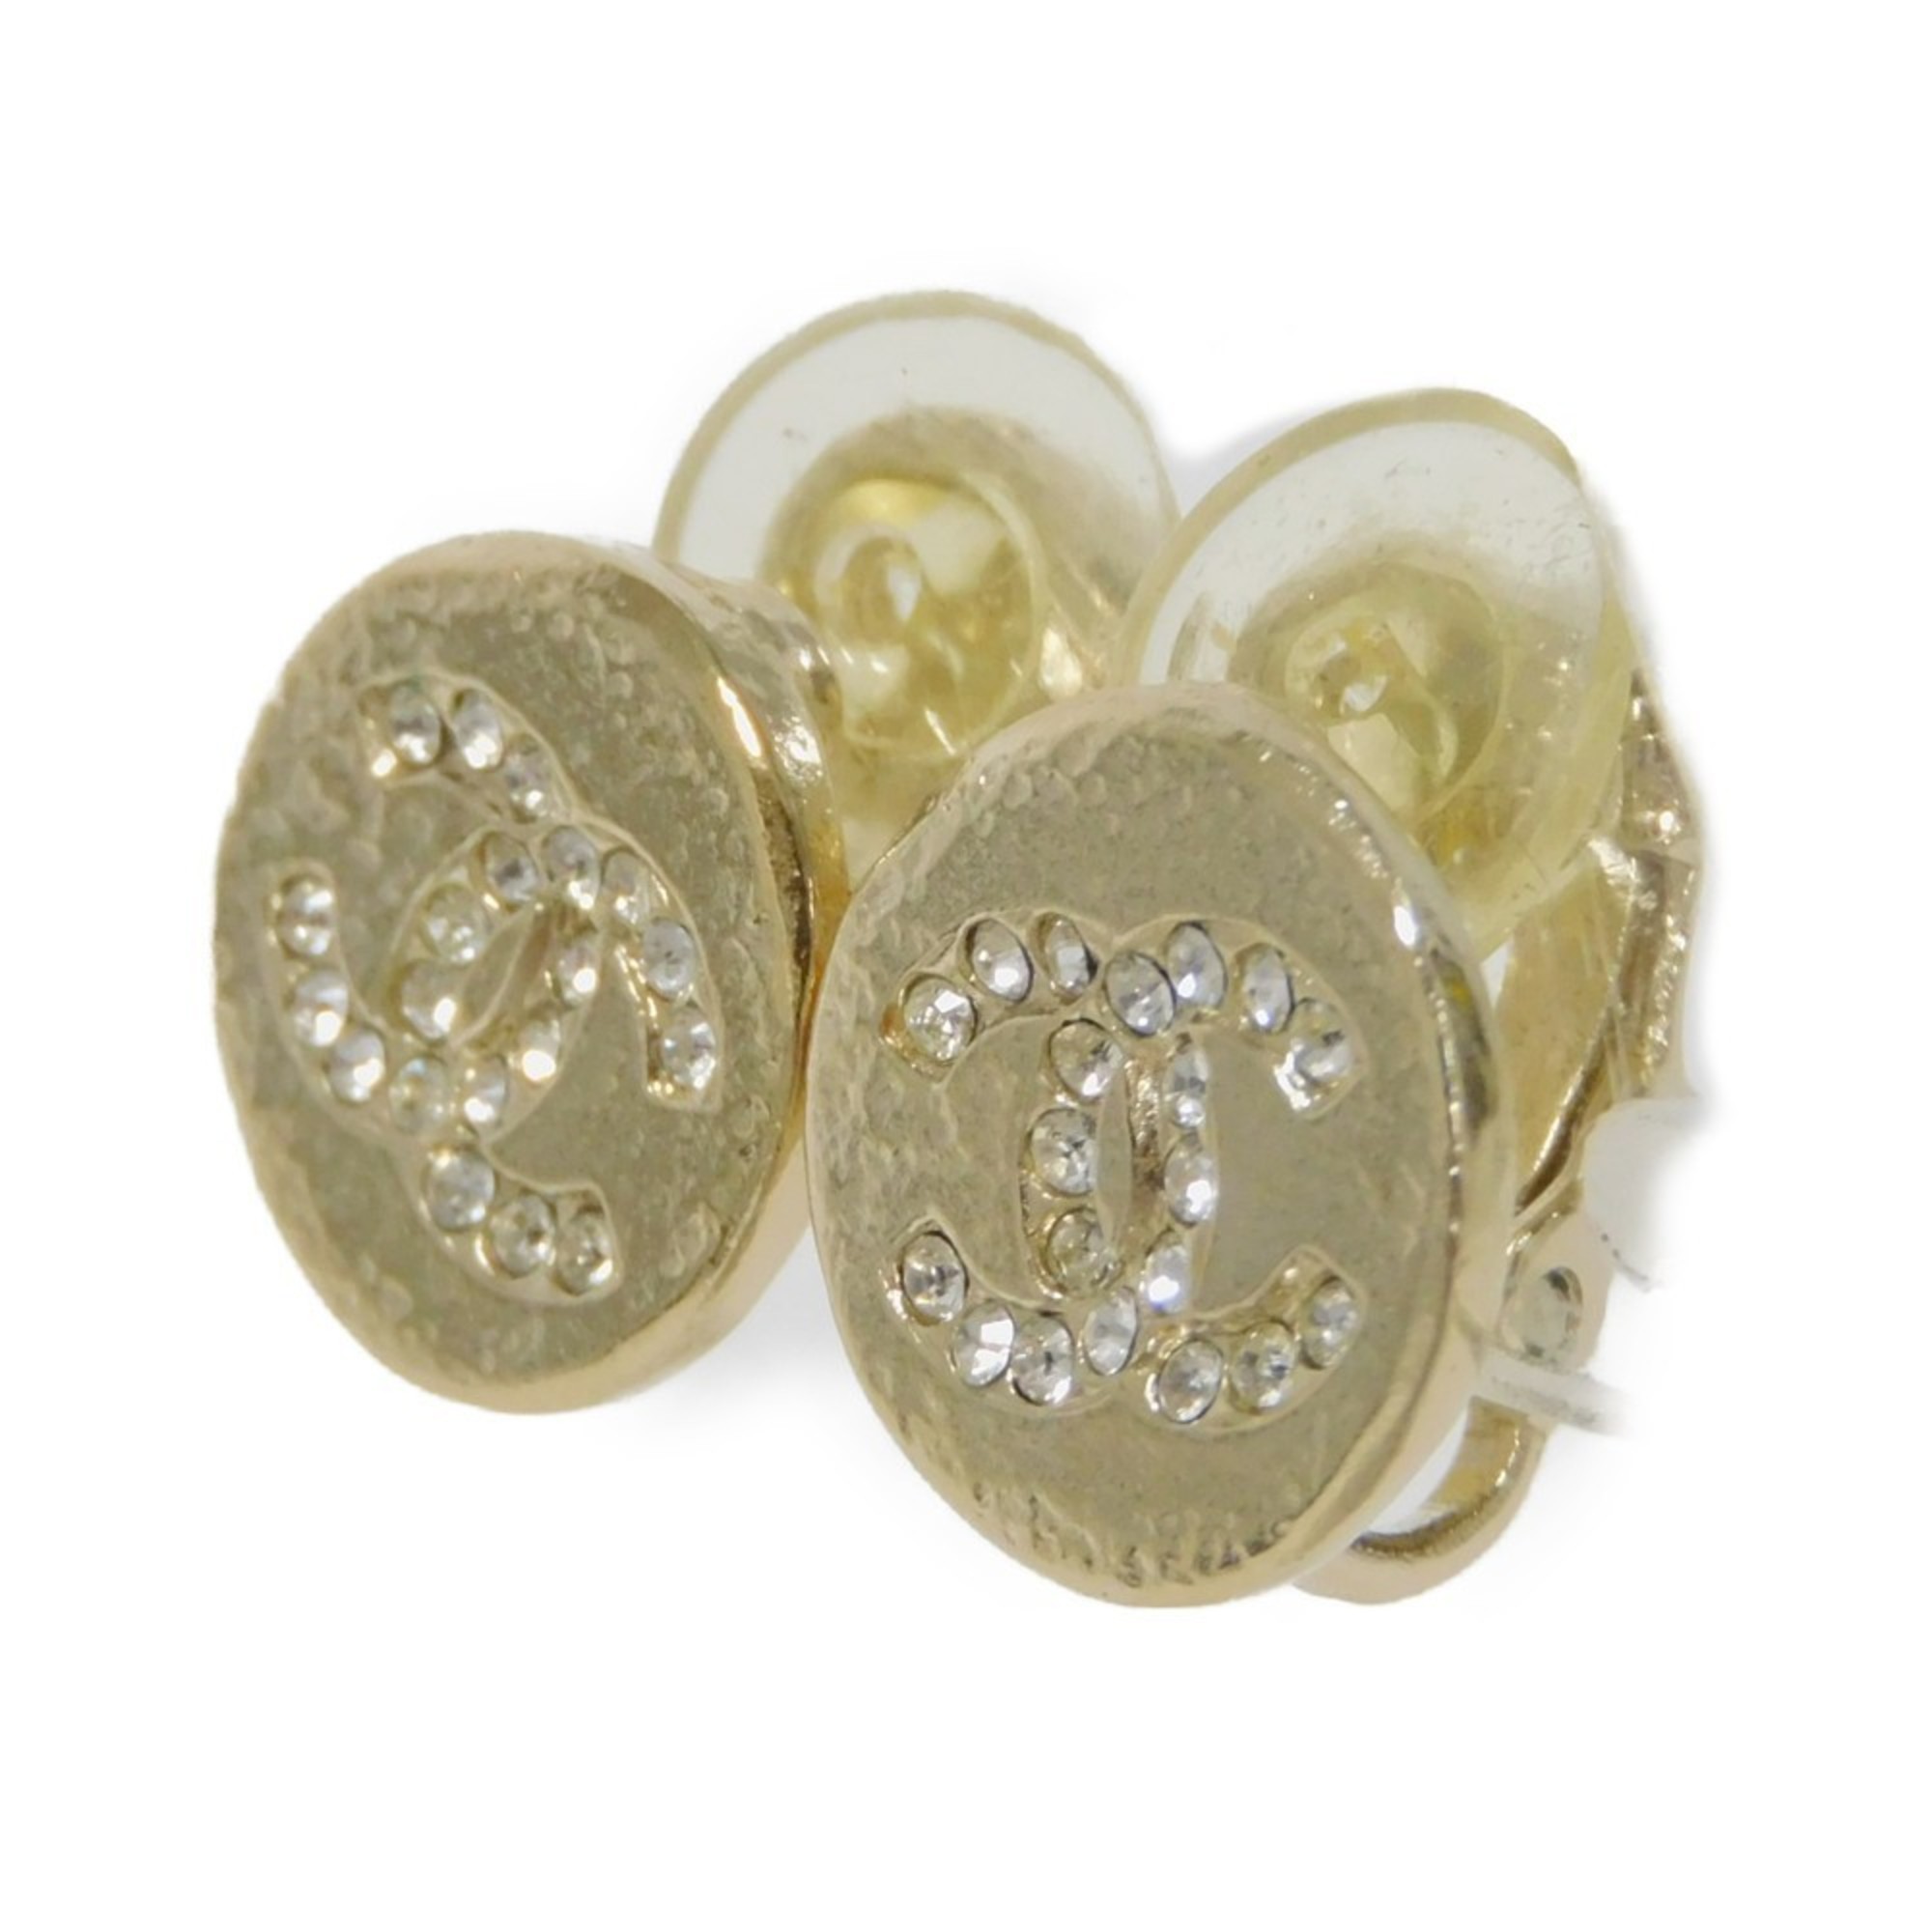 CHANEL Earrings Round Crystal Coco Mark Rhinestone Clear Champagne Gold Plated A19A CC Women's